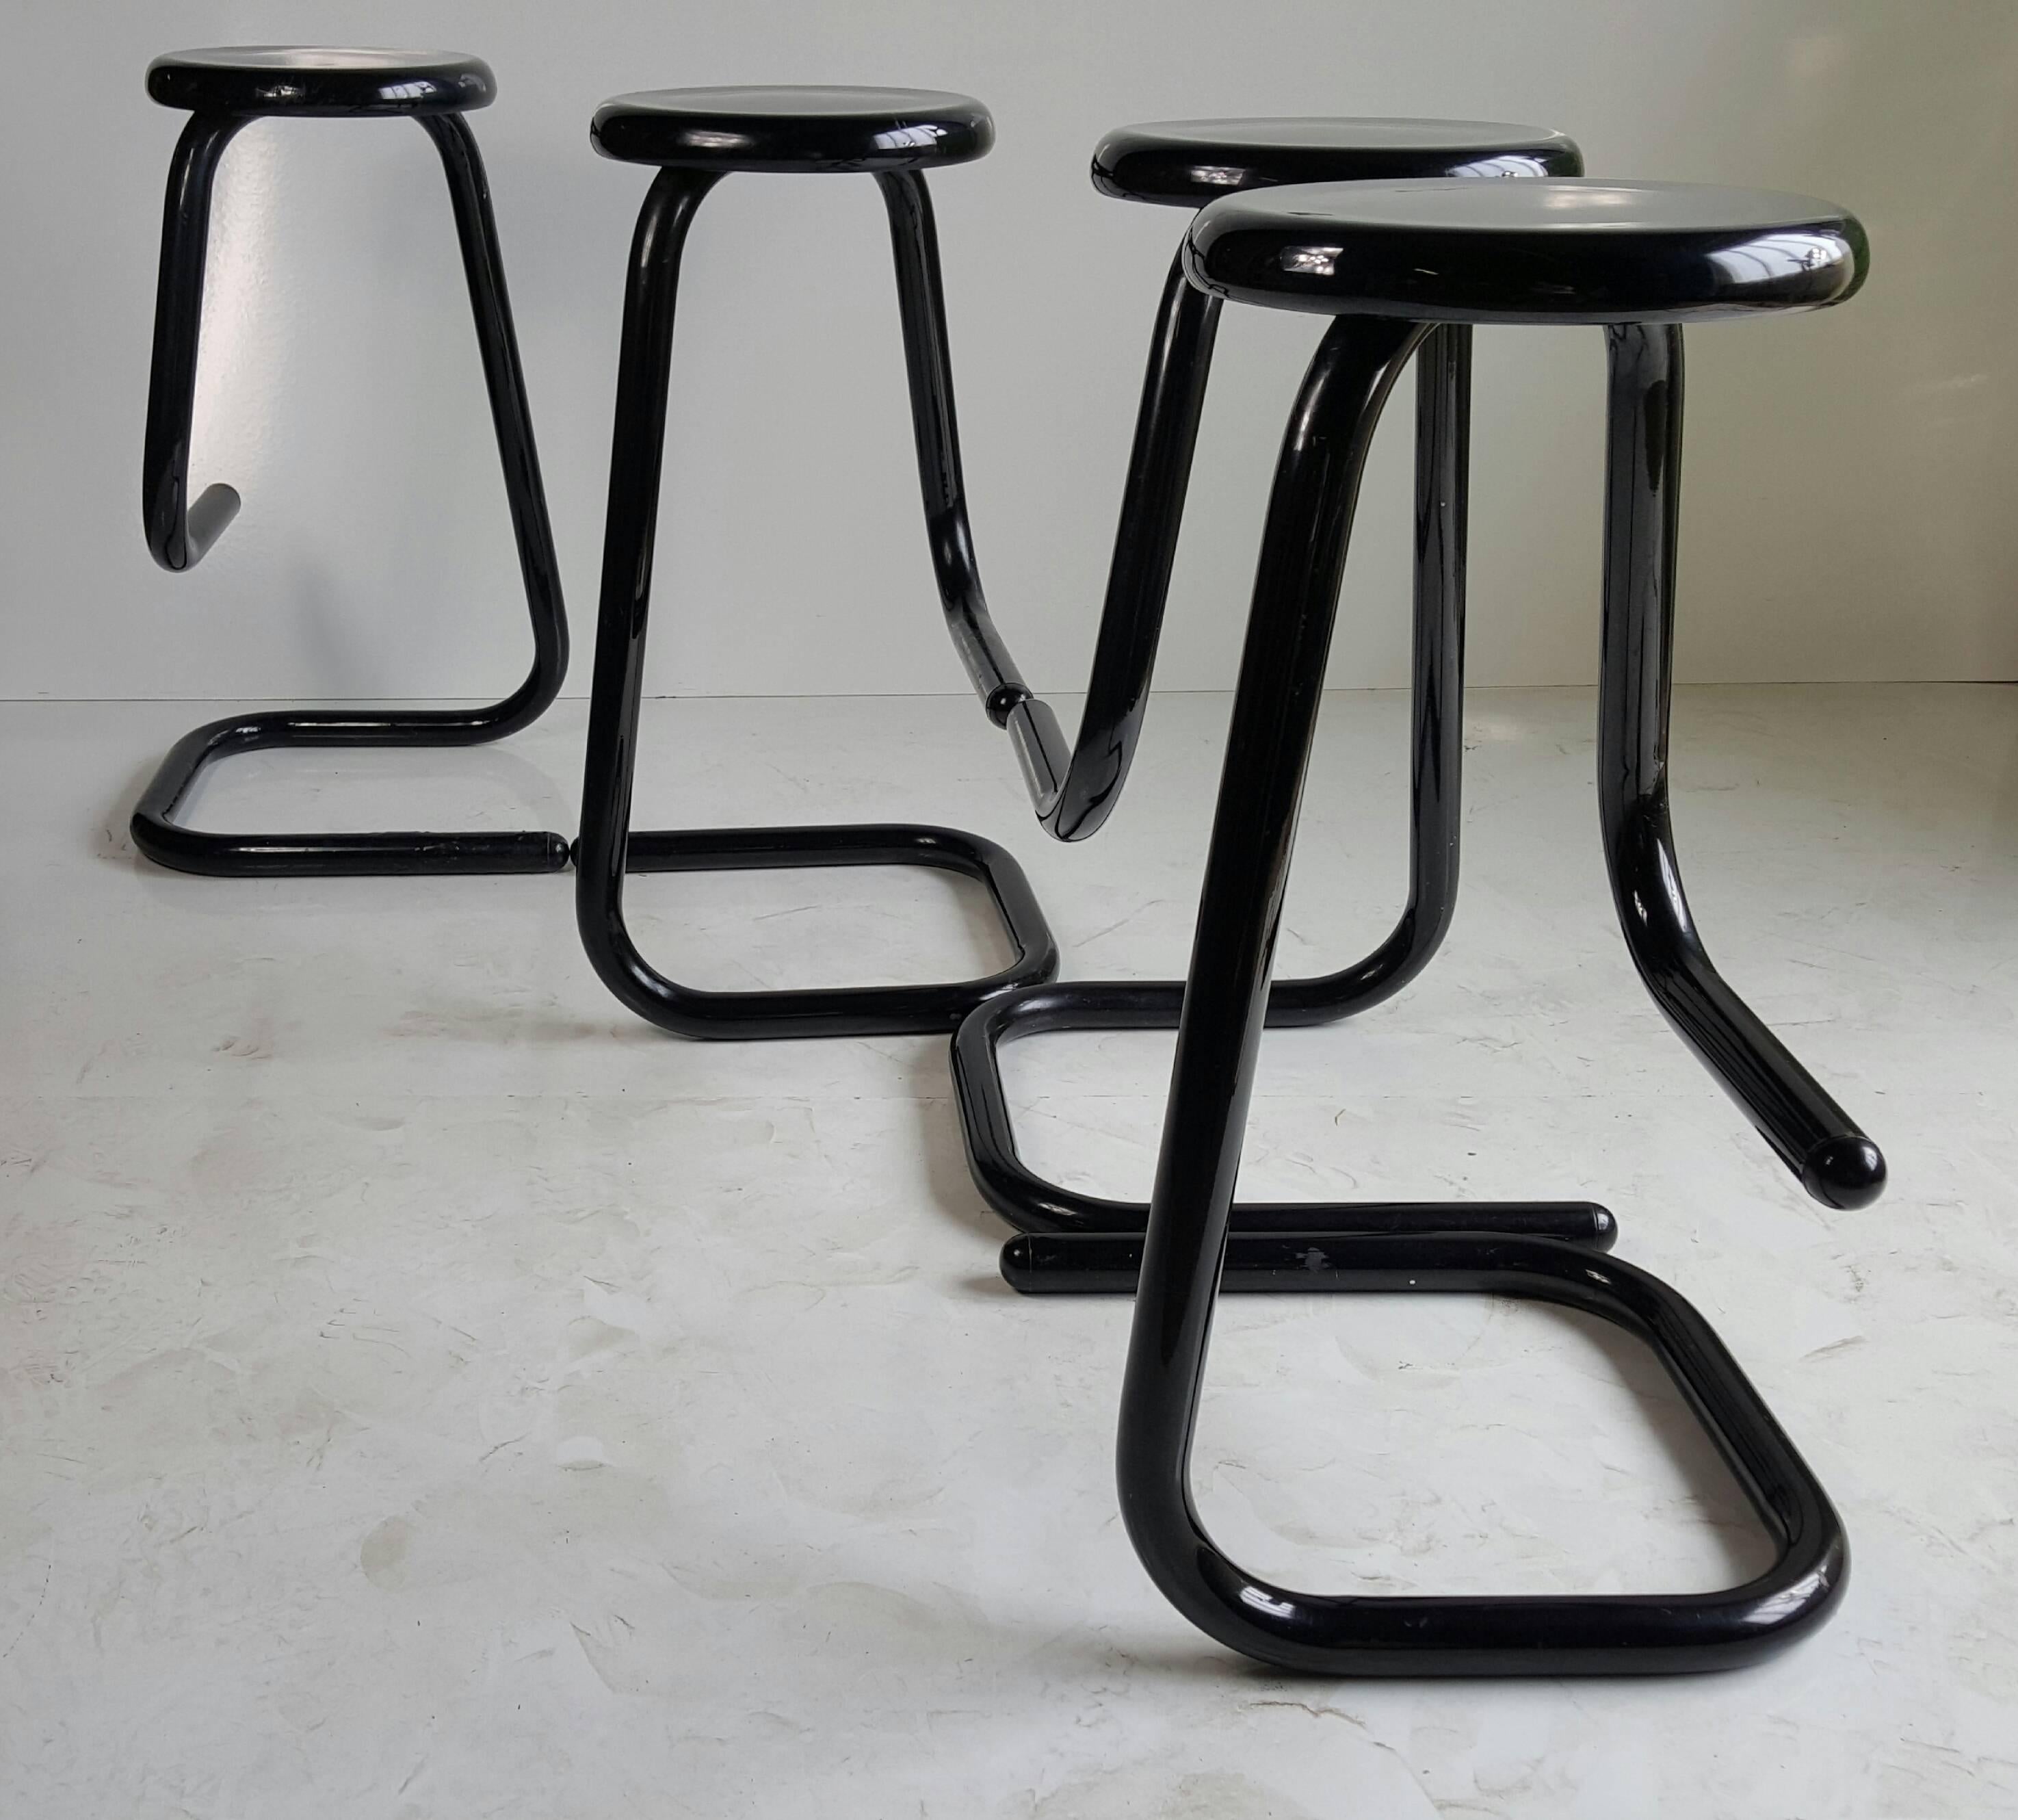 A simple and beautiful design built using a continuous piece of tubular steel that is bent to form a cantilevered base and solid footrest. The resulting bent paperclip form is purposeful, unique and has been in production for over thirty years.
